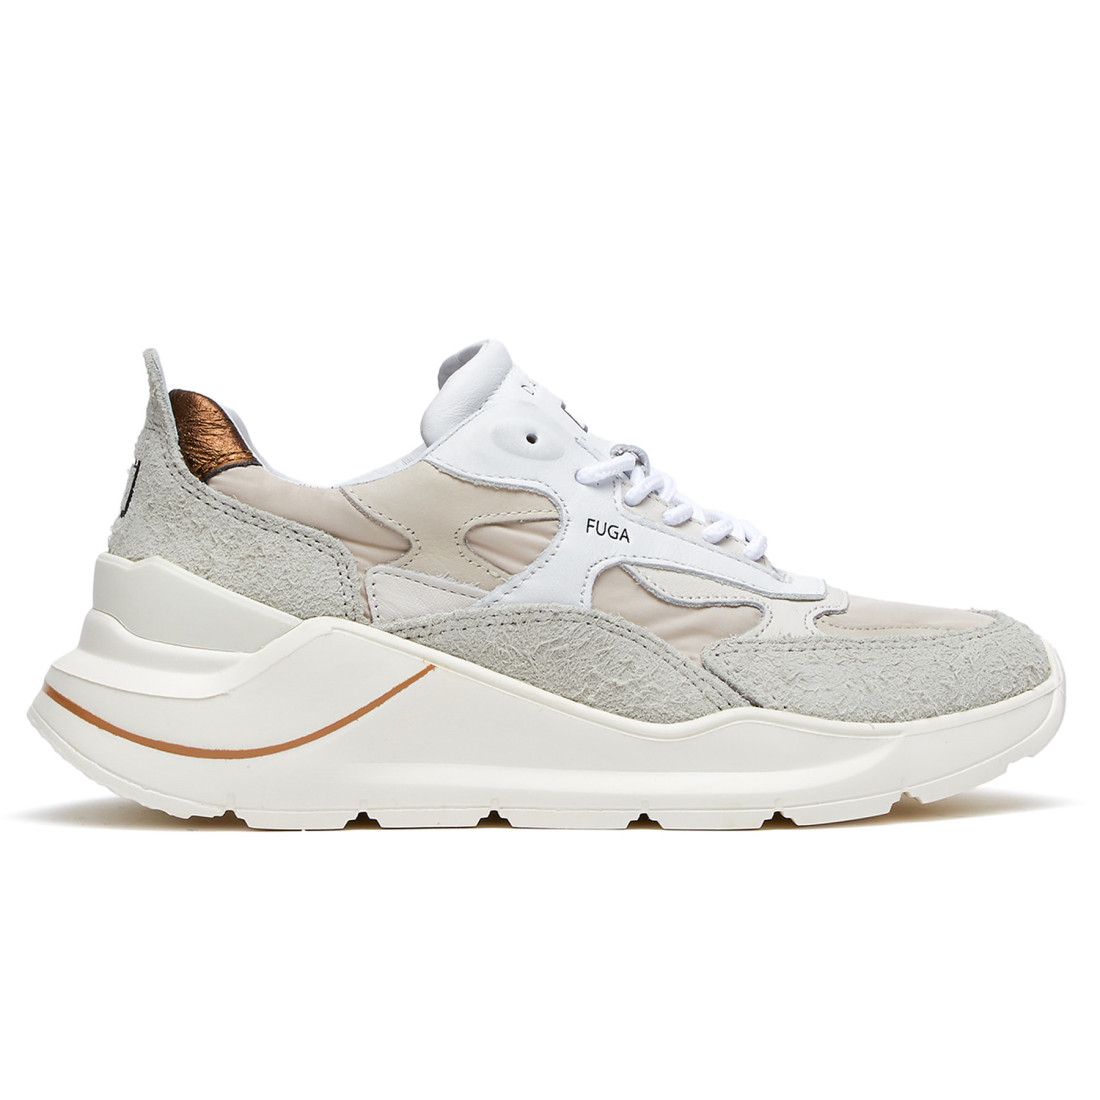 D.A.T.E. Fuga beige, white and gray sneakers in suede and fabric